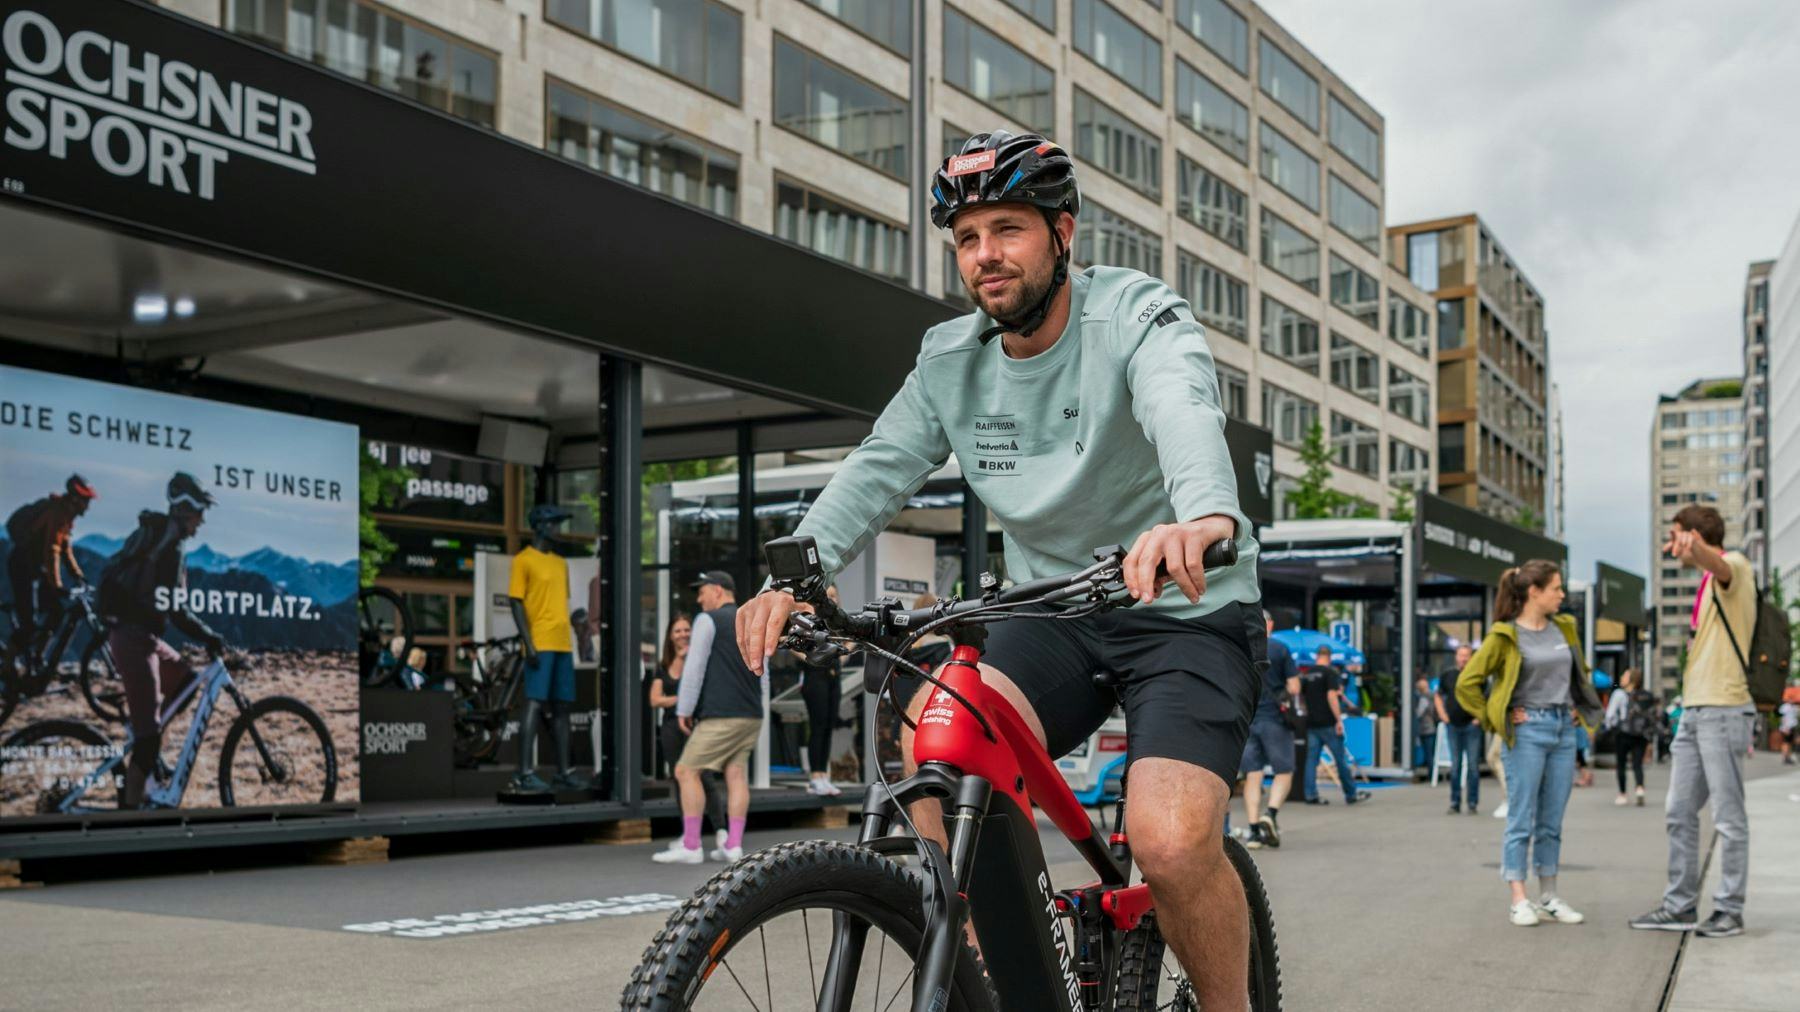 In 2022 Swiss chain store Ochsner Sport took over the small e-bike brand E-Framer and gained Olympic downhill champion Beat Feuz as an ambassador. – Photo Peter Hummel